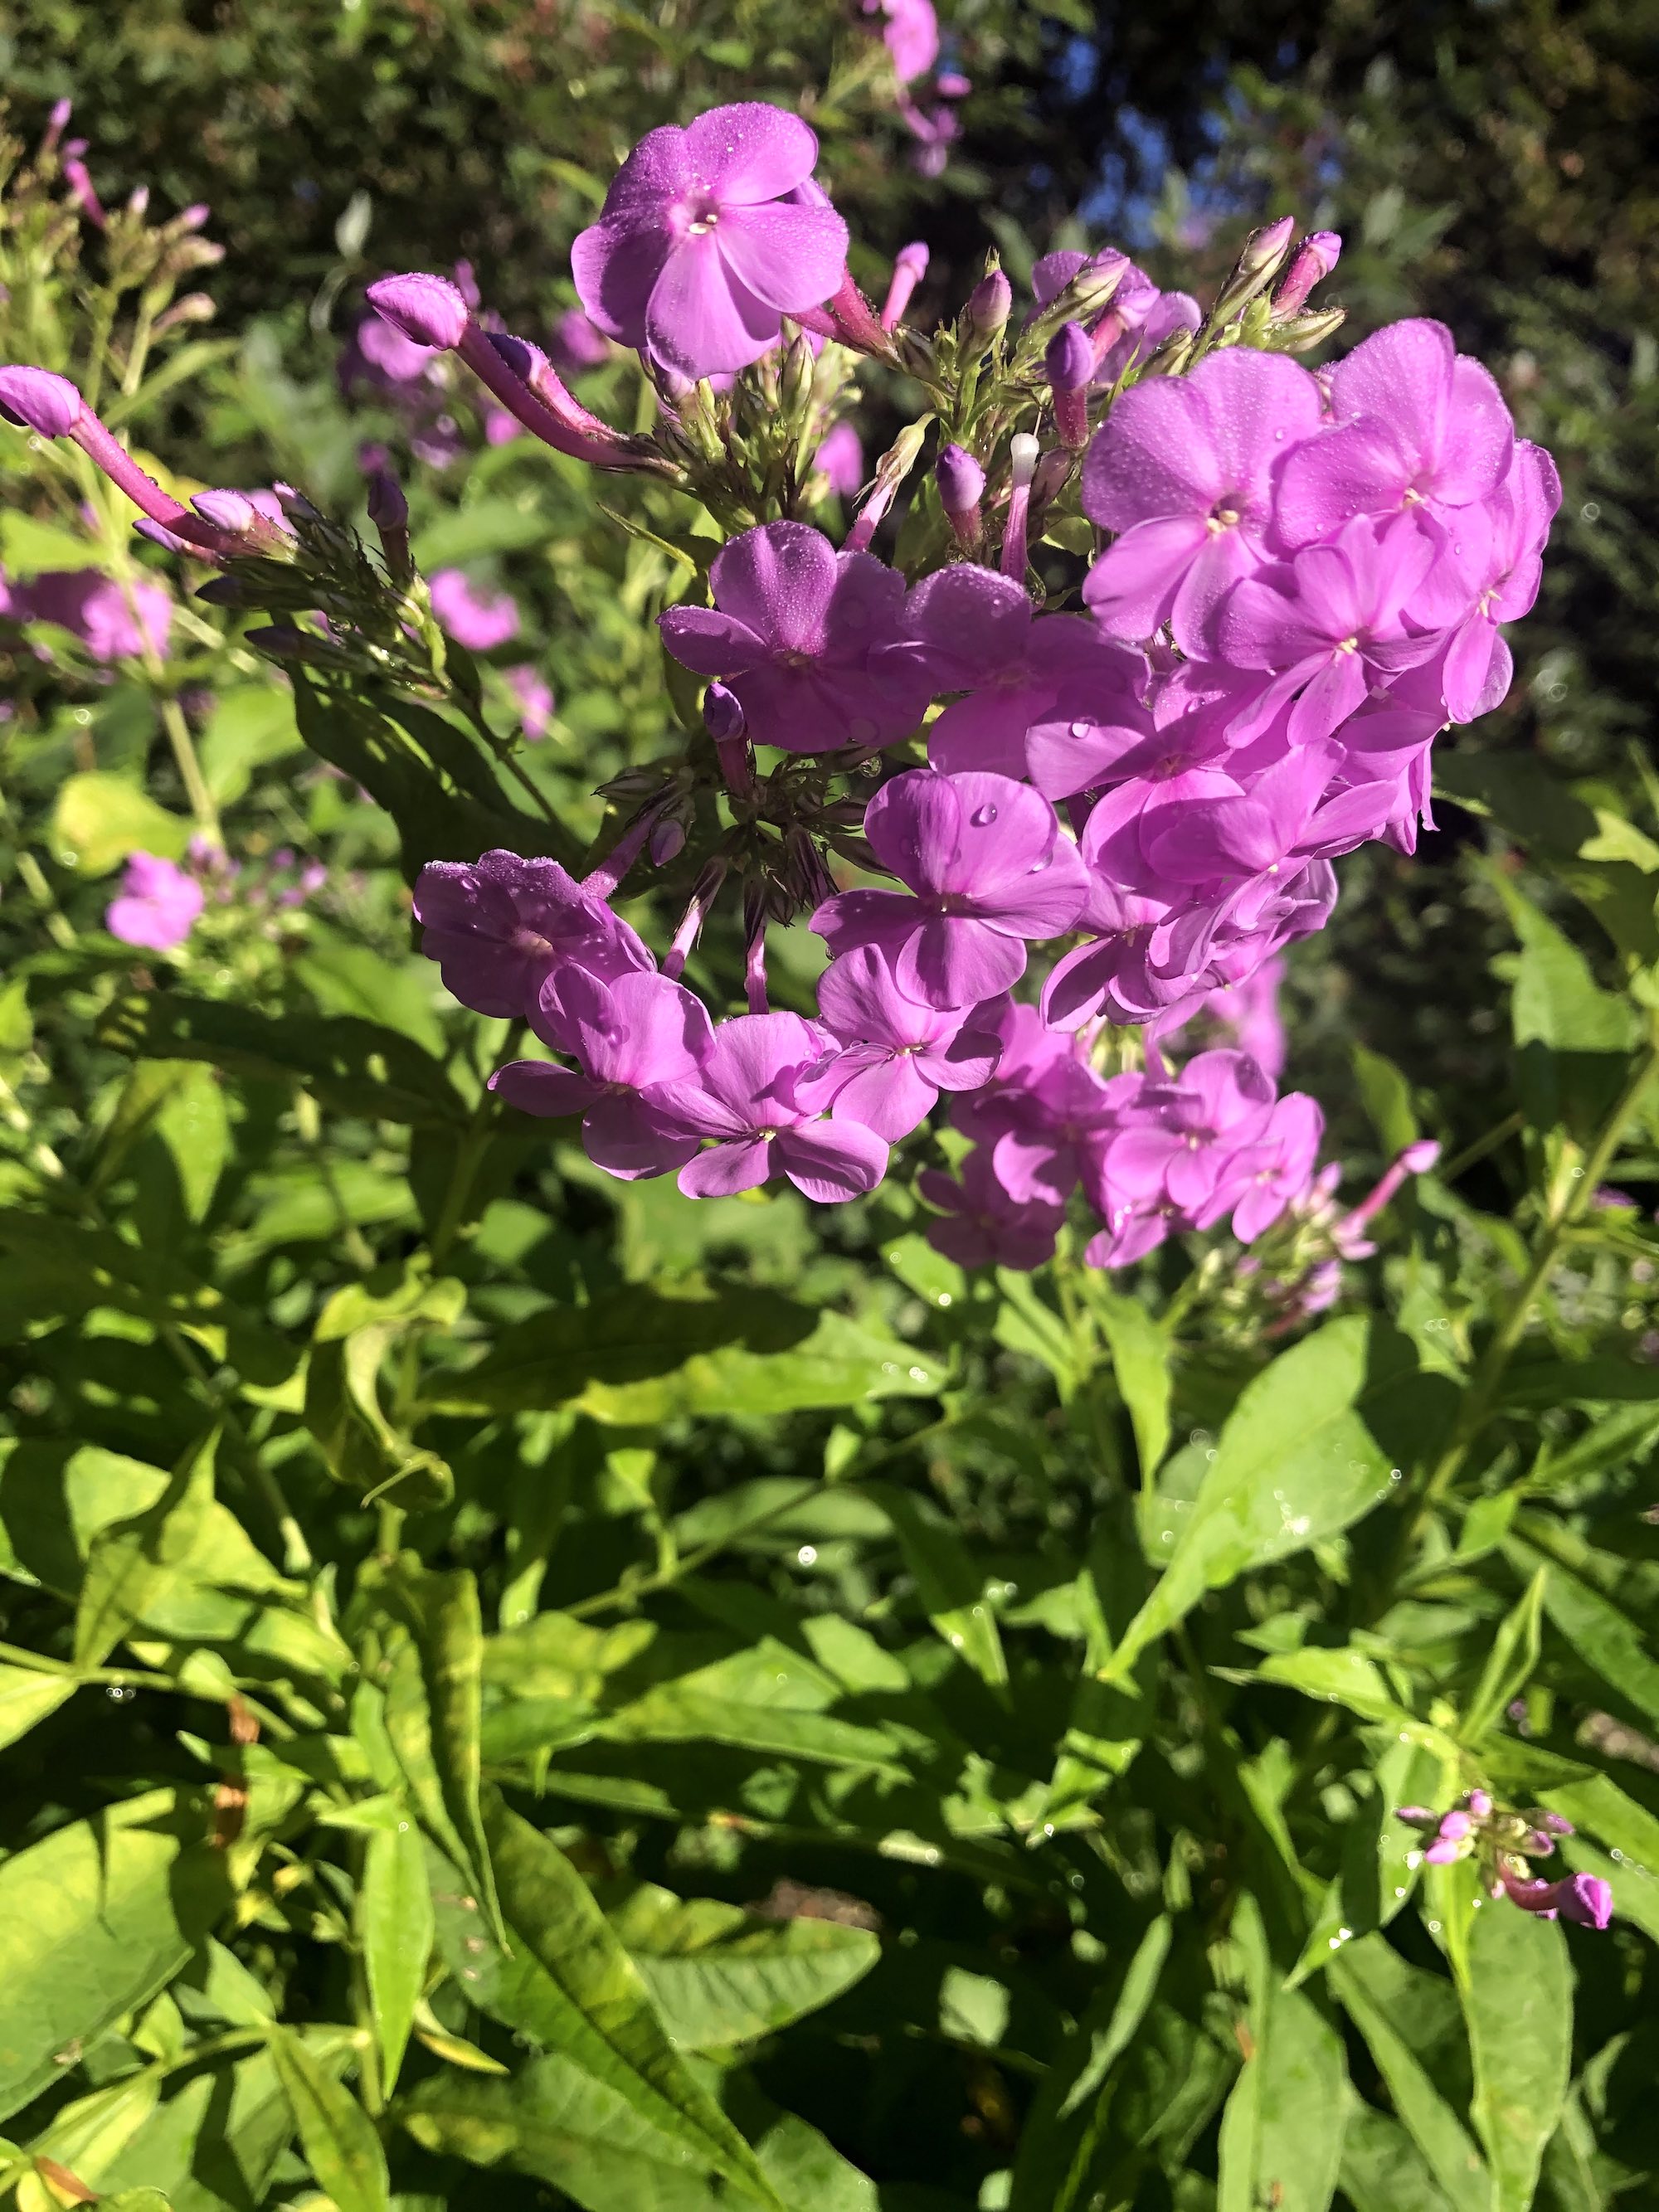 Tall Garden Phlox by Duck Pond on August 11, 2020.